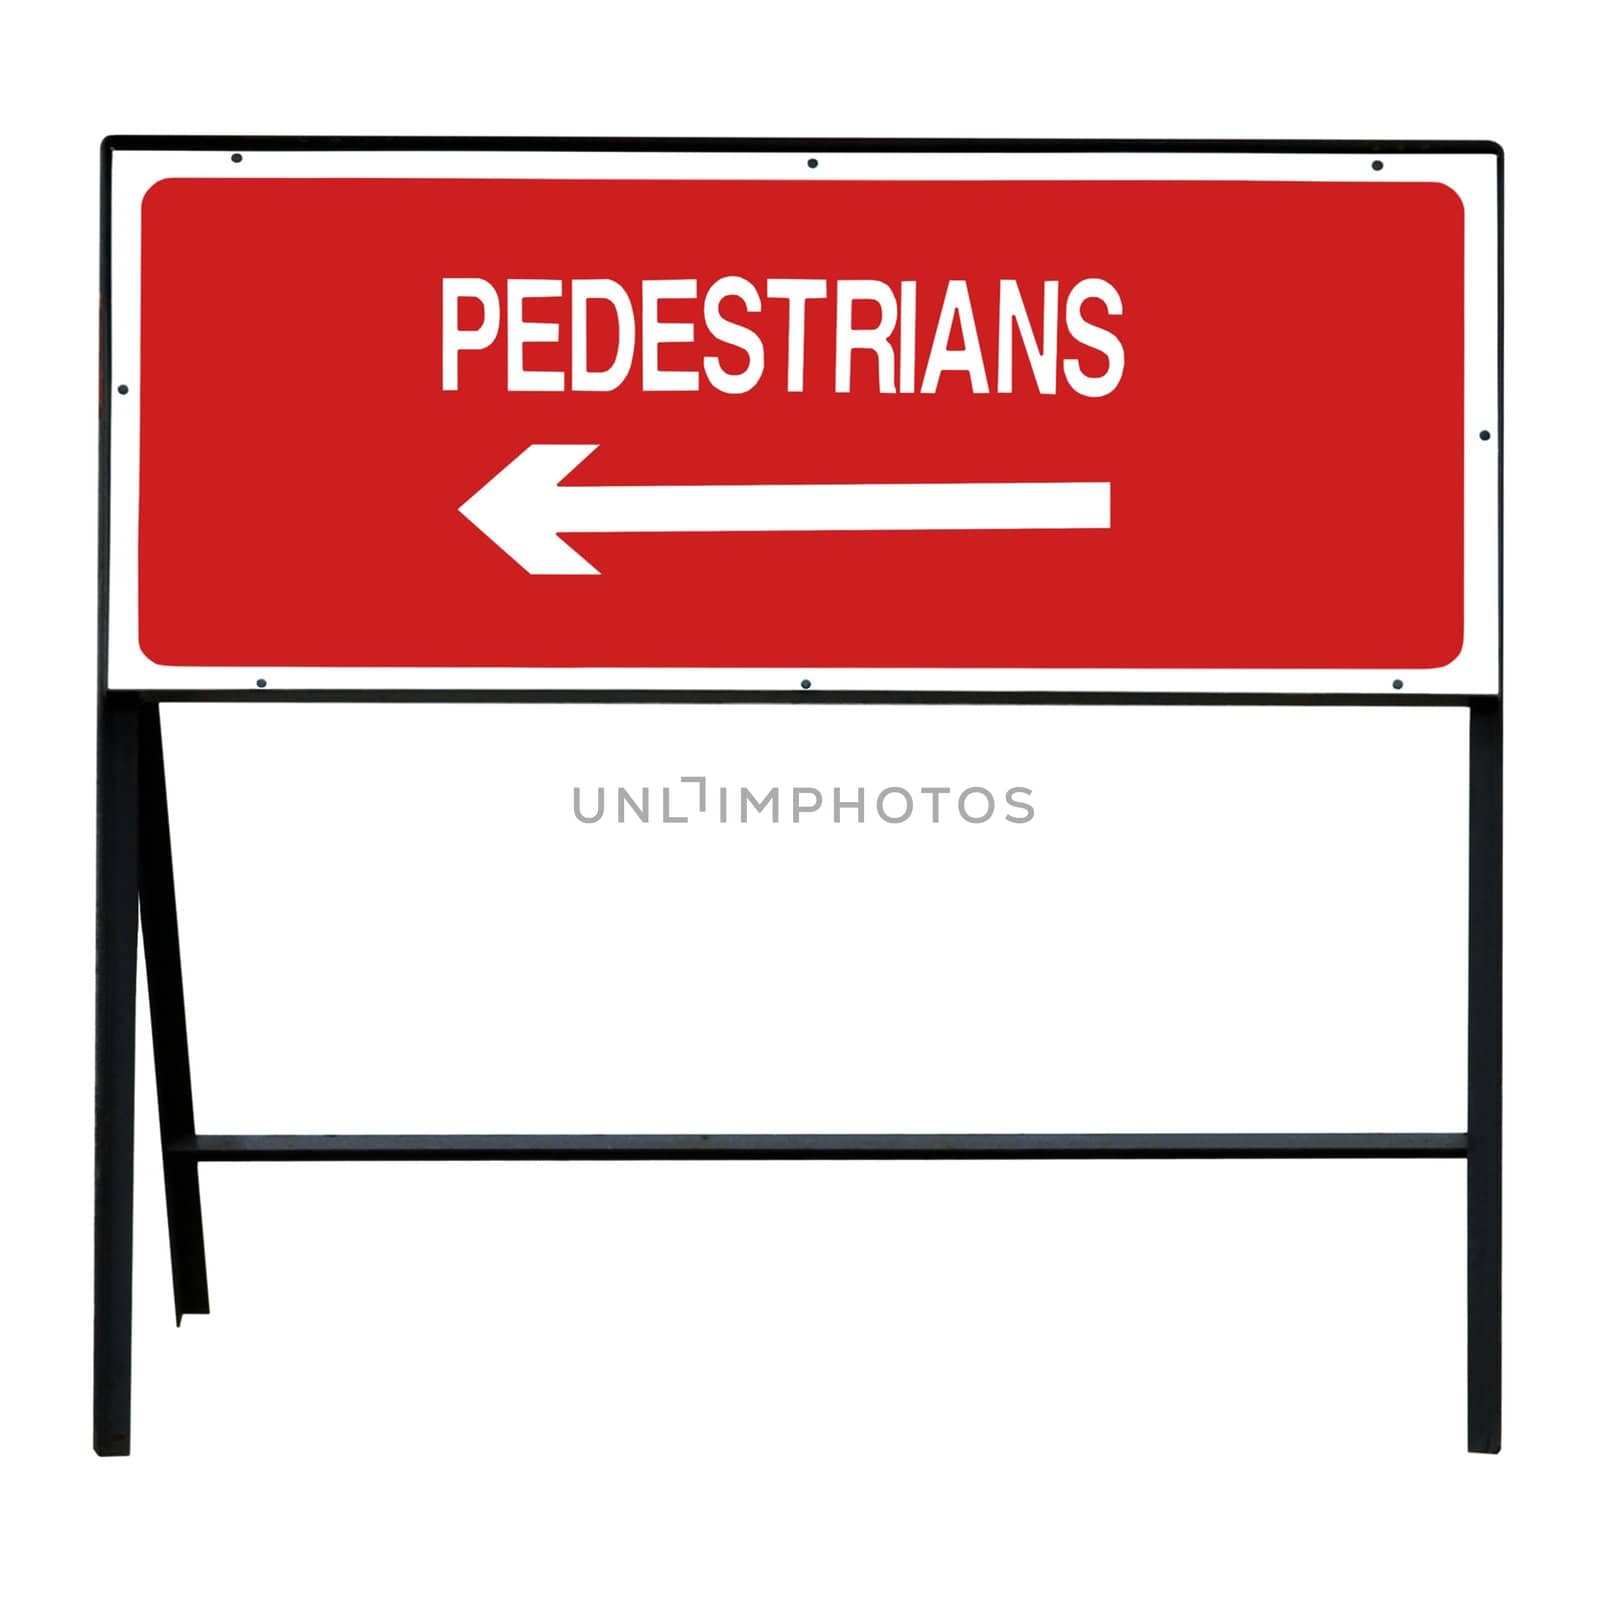 Temporary road safety sign for directing pedestrians around roadworks or construction site